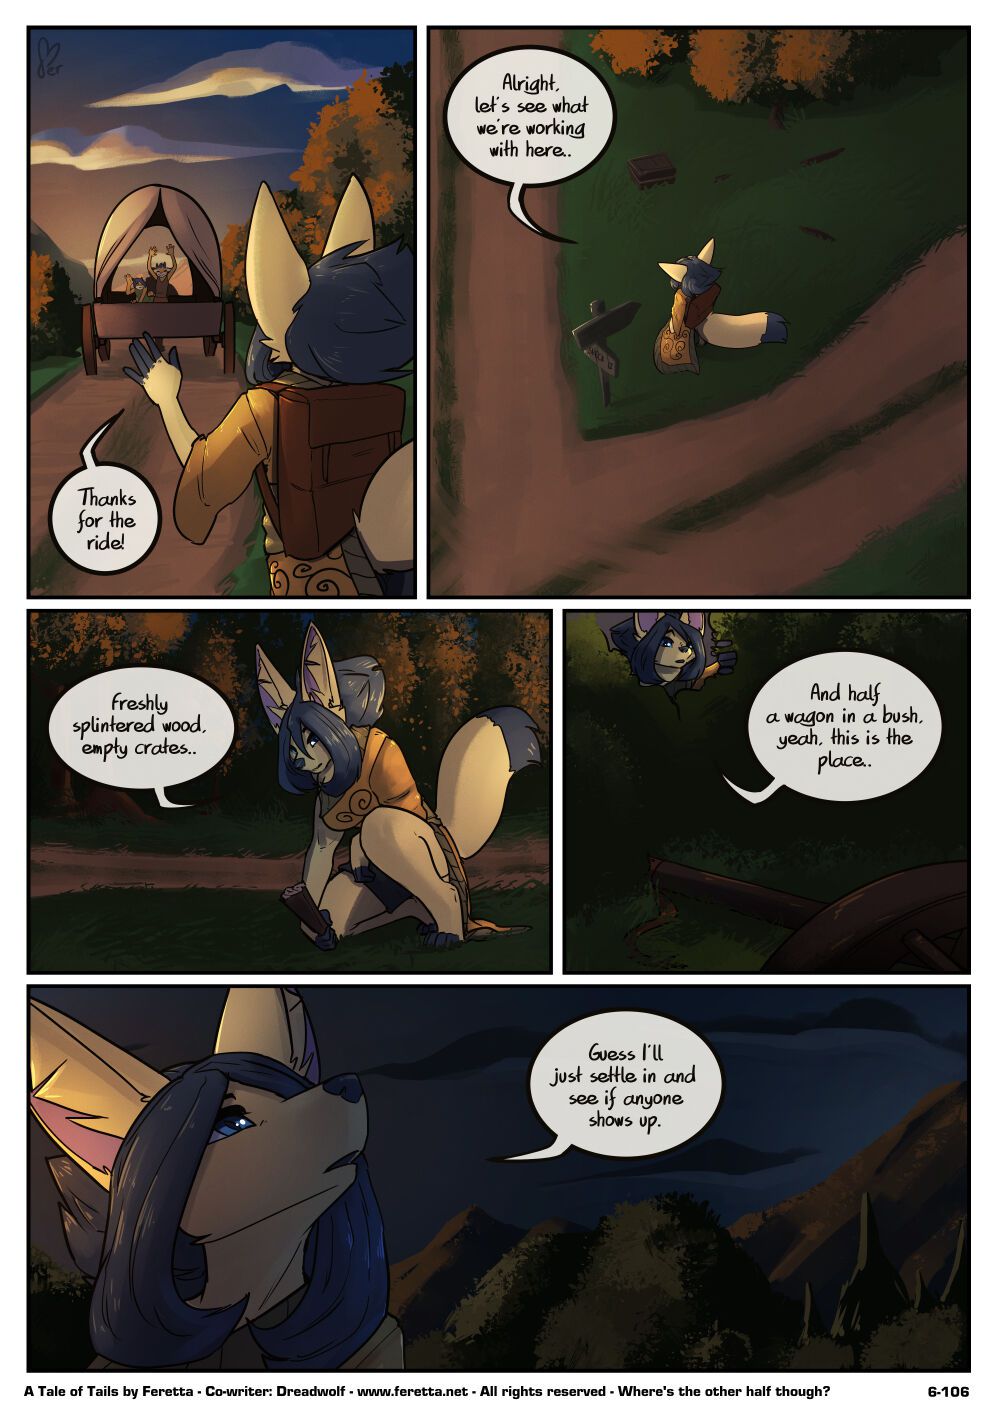 [Feretta] Farellian Legends: A Tale of Tails (w/Extras) [Ongoing] 401